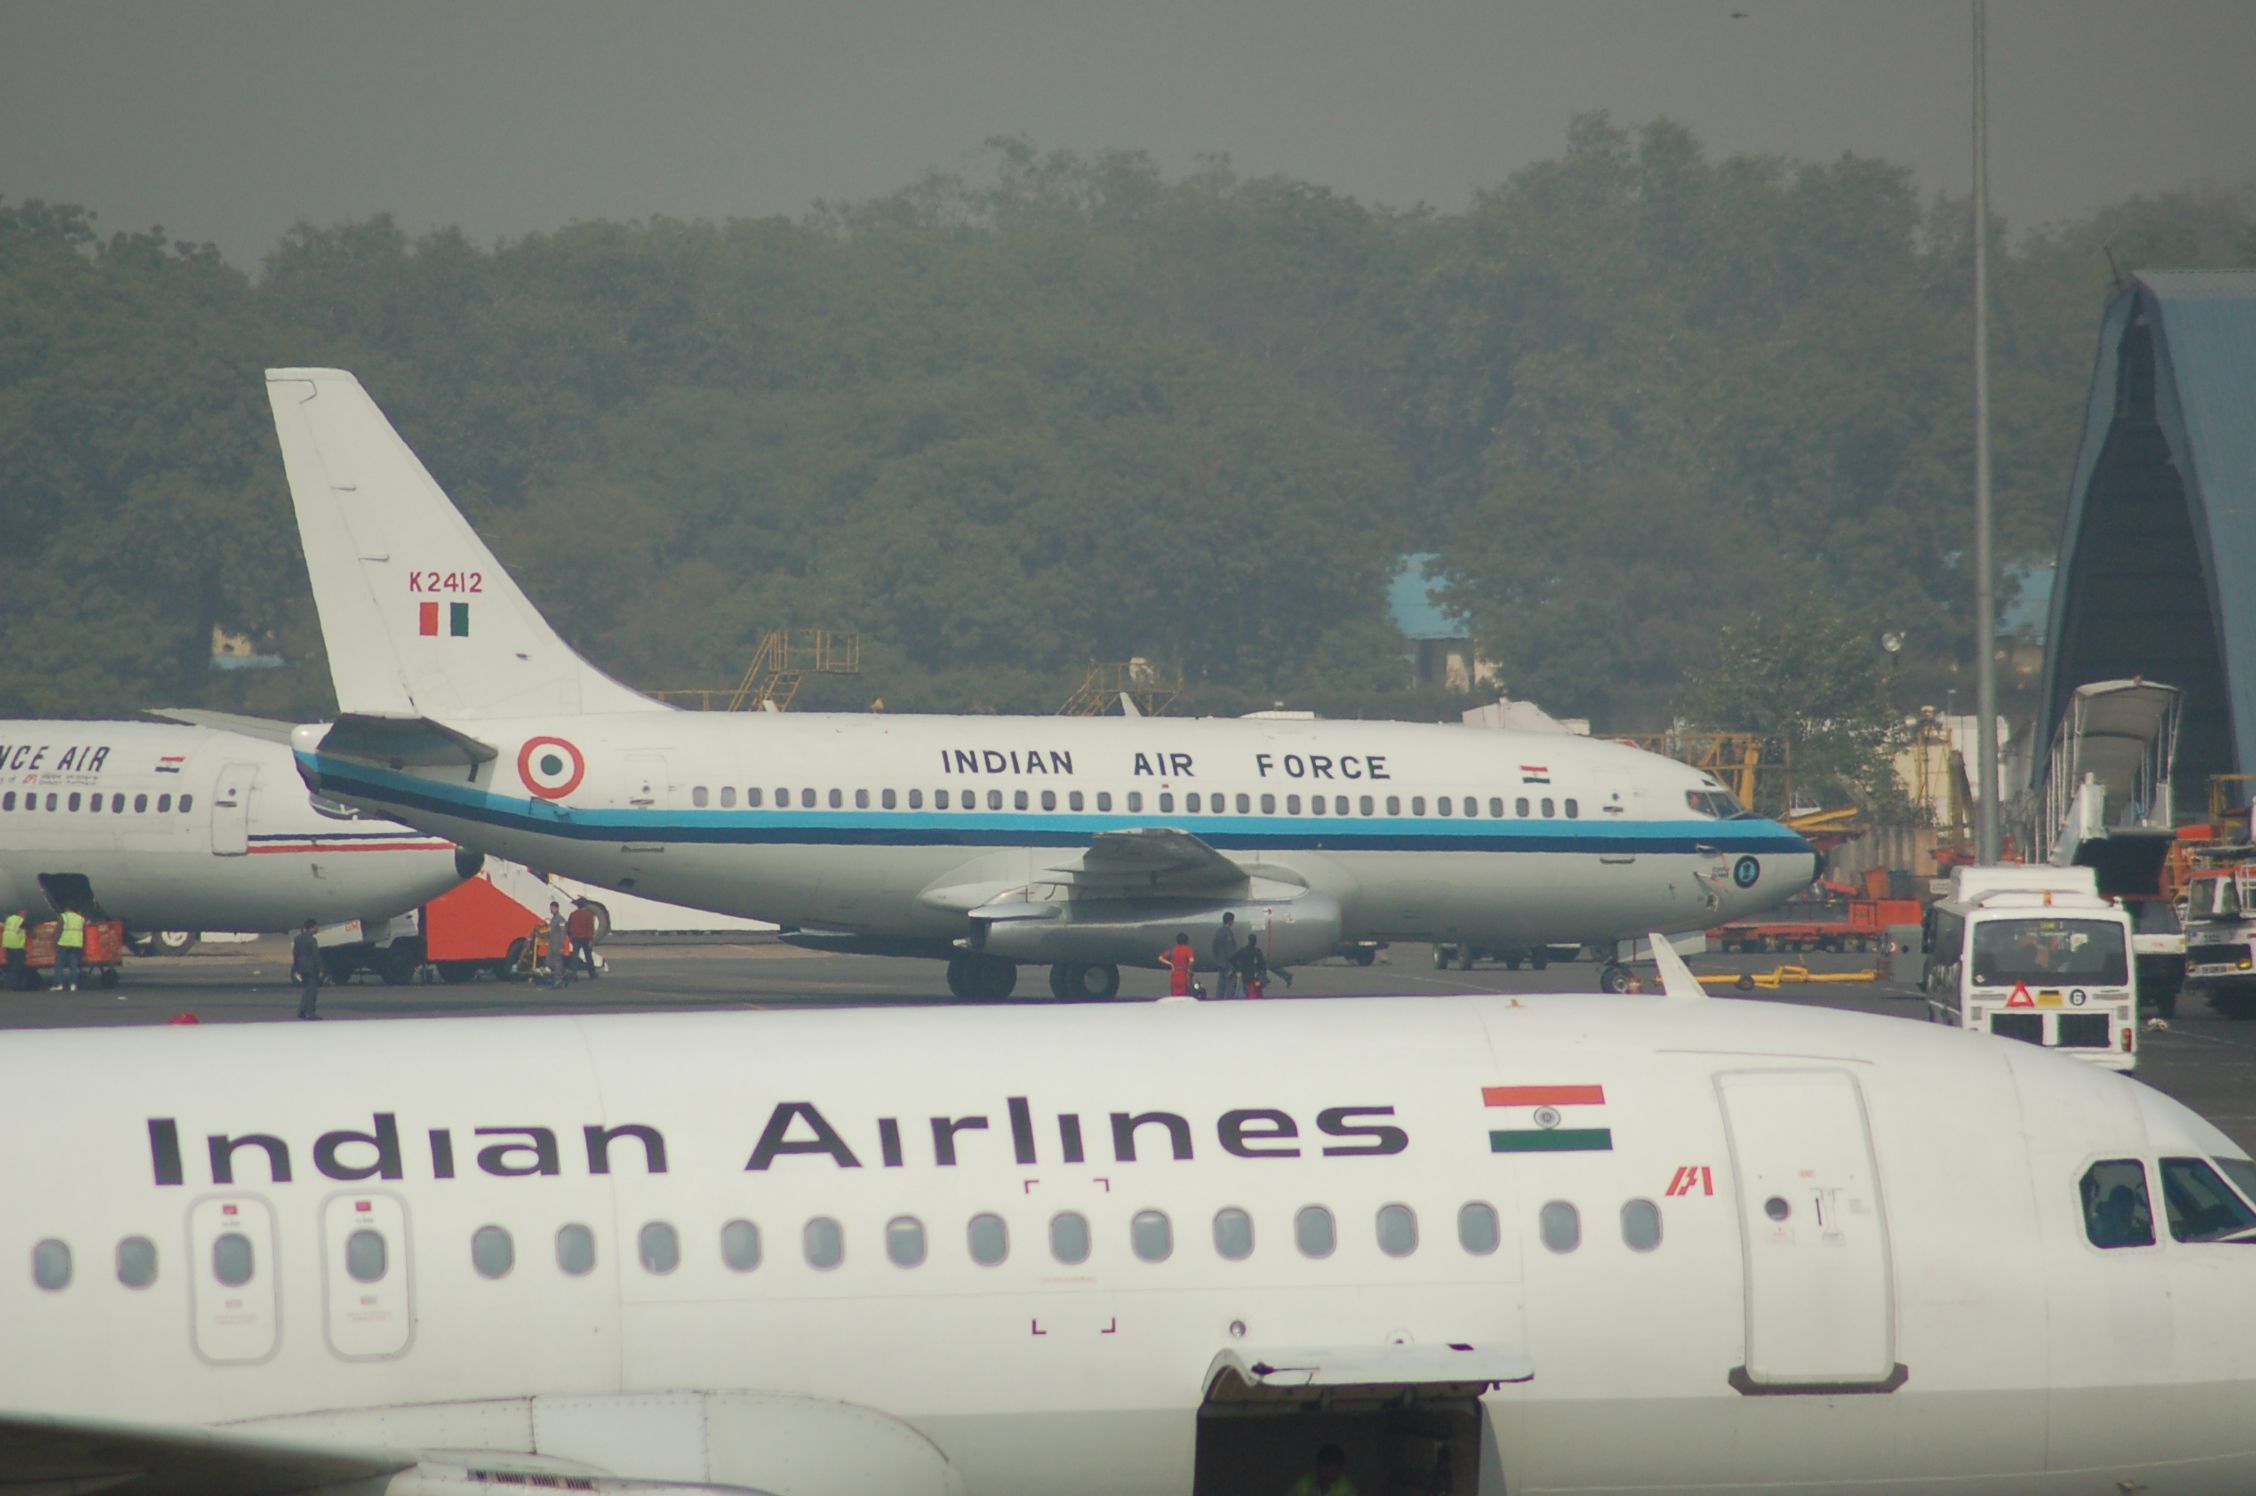 Indian Air Force 737-200 